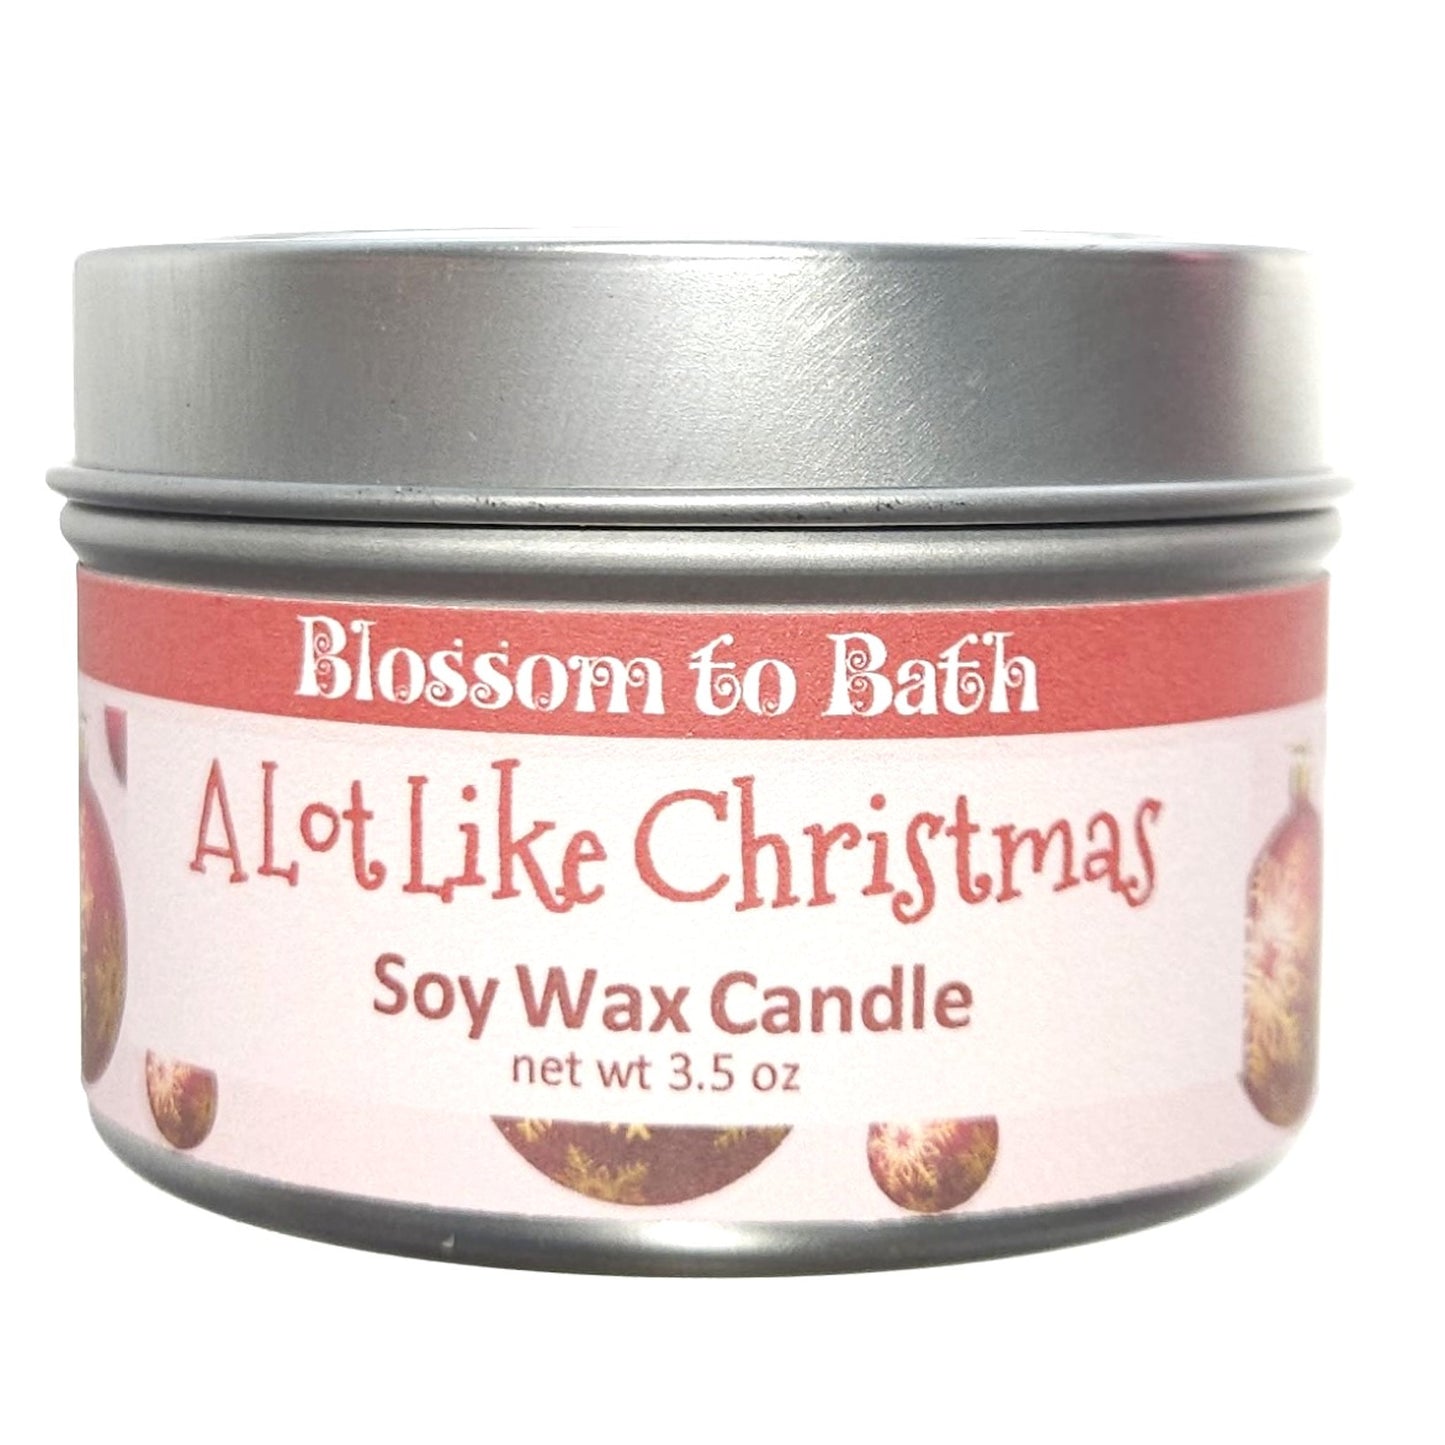 Buy Blossom to Bath A Lot Like Christmas Soy Wax Candle from Flowersong Soap Studio.  Fill the air with a charming fragrance that lasts for hours  Find the holiday mood in an instant with this spicy sweet fragrance.